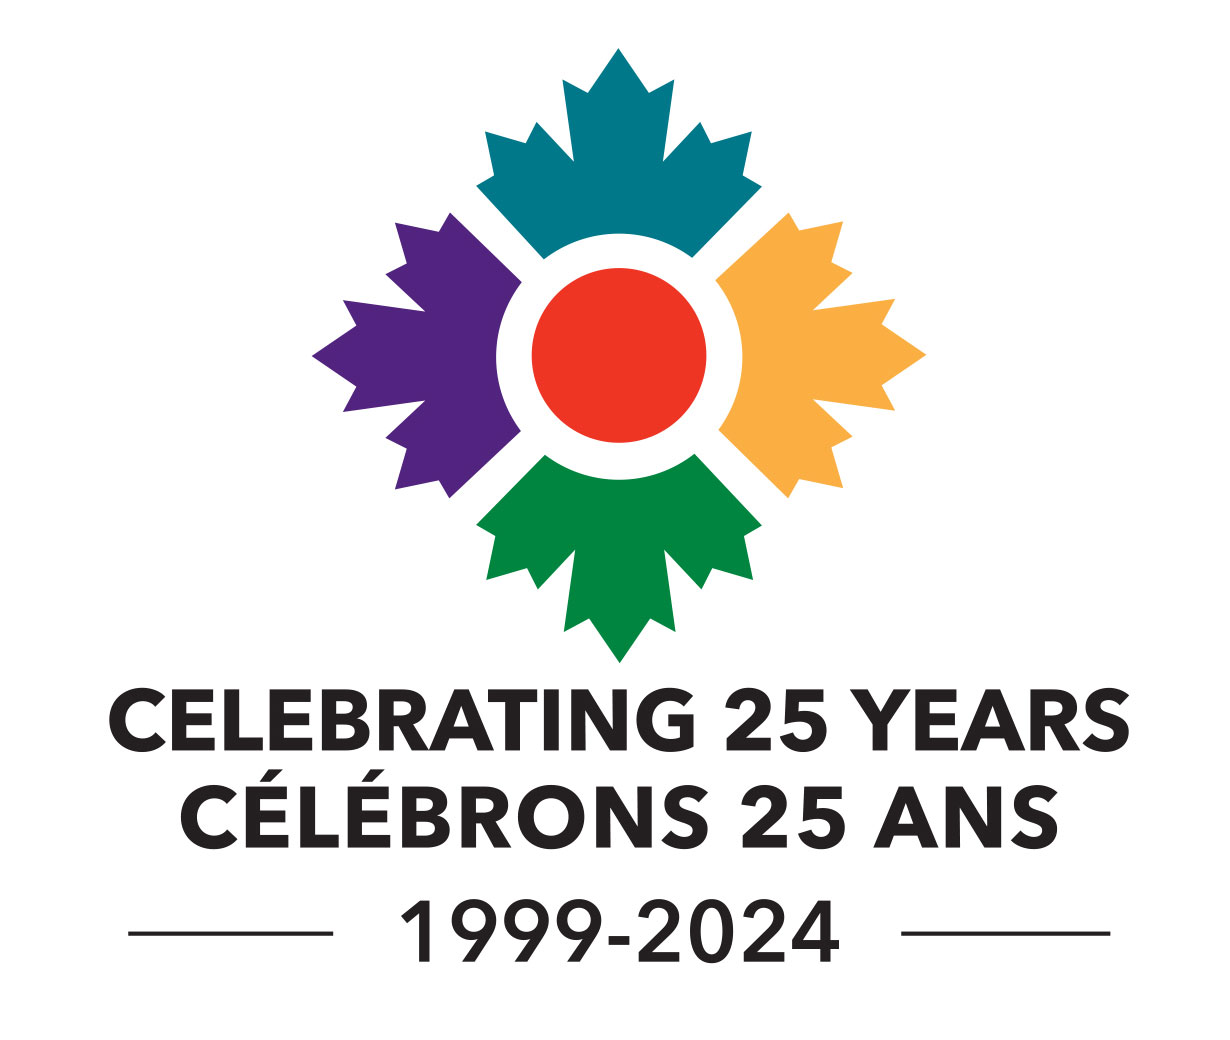 25th anniversary of the Museum